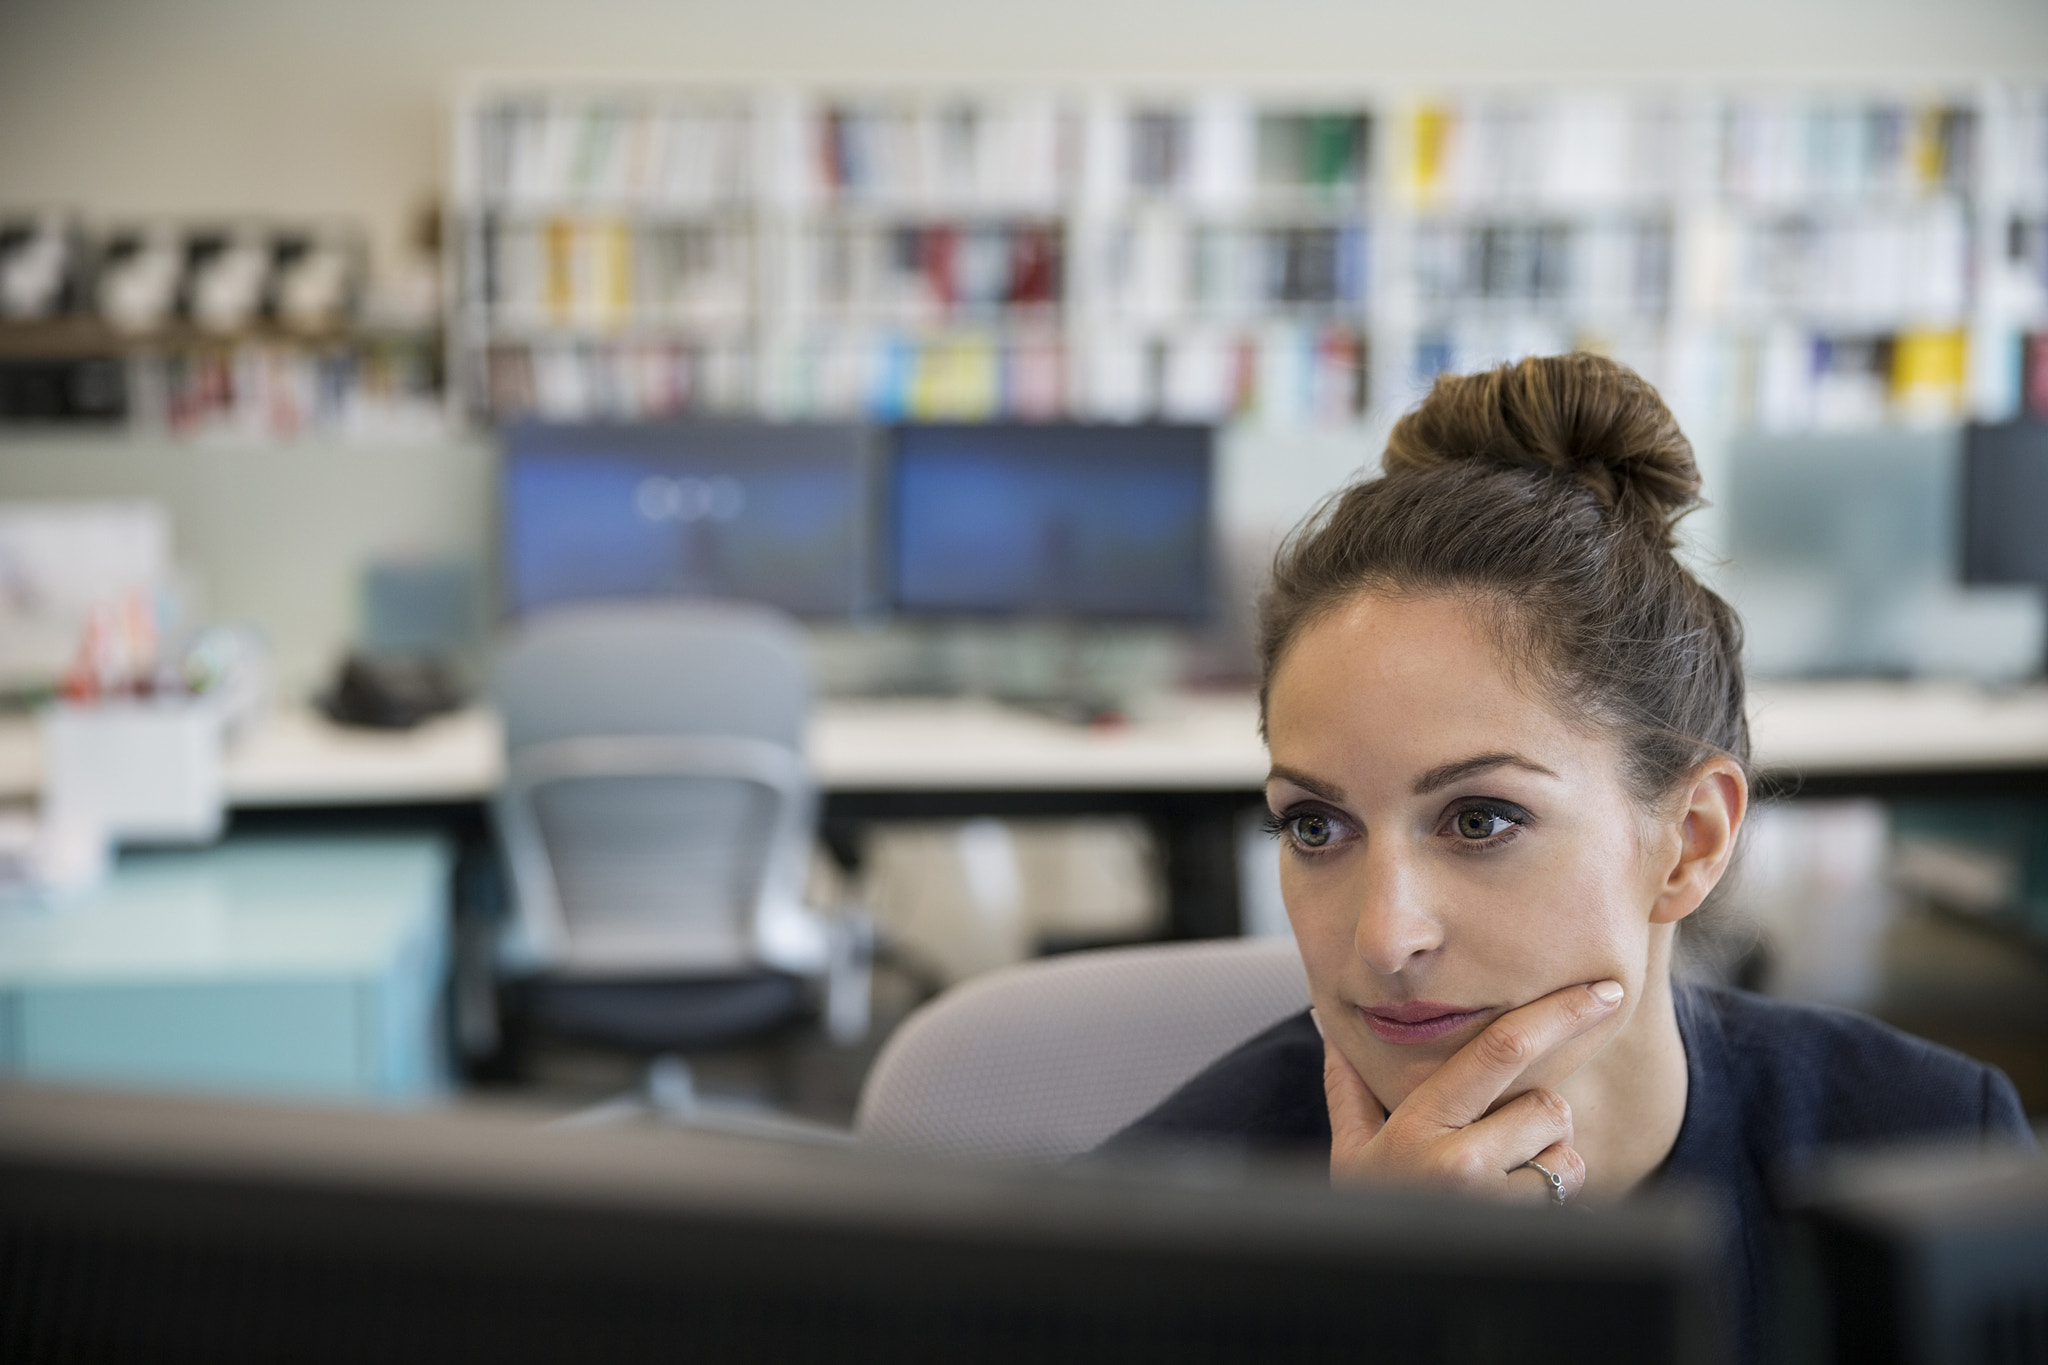 Focused businesswoman working at computer in office